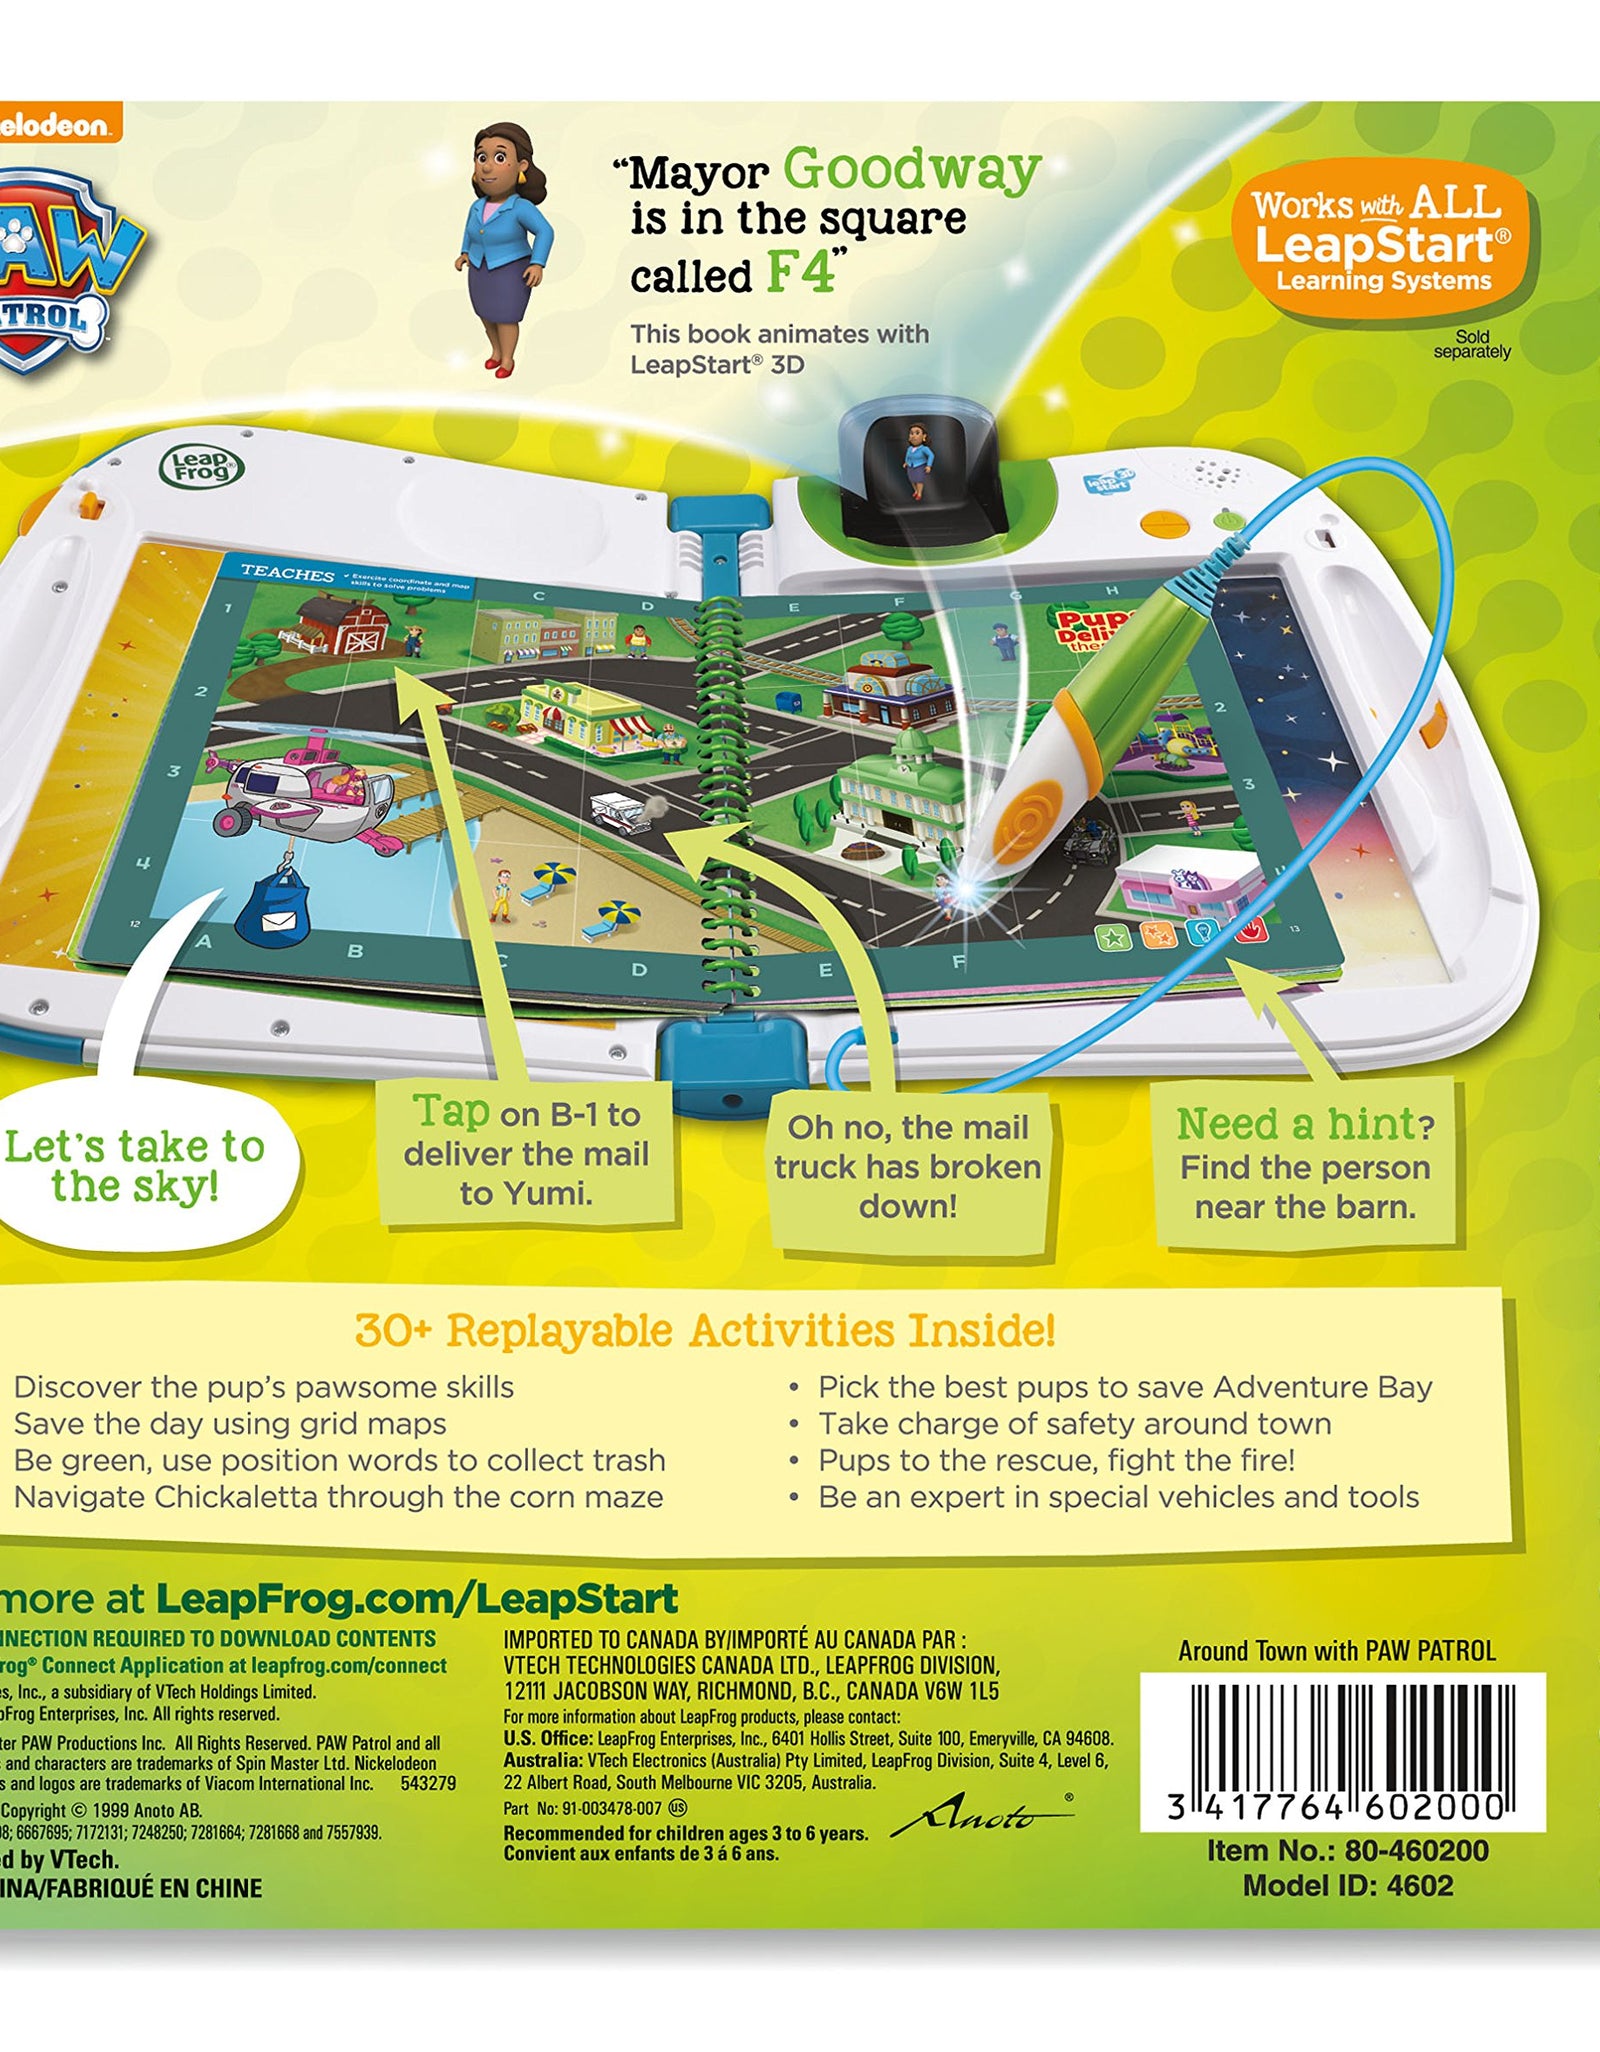 LeapFrog LeapStart 3D Around Town with PAW Patrol Book, Level 2